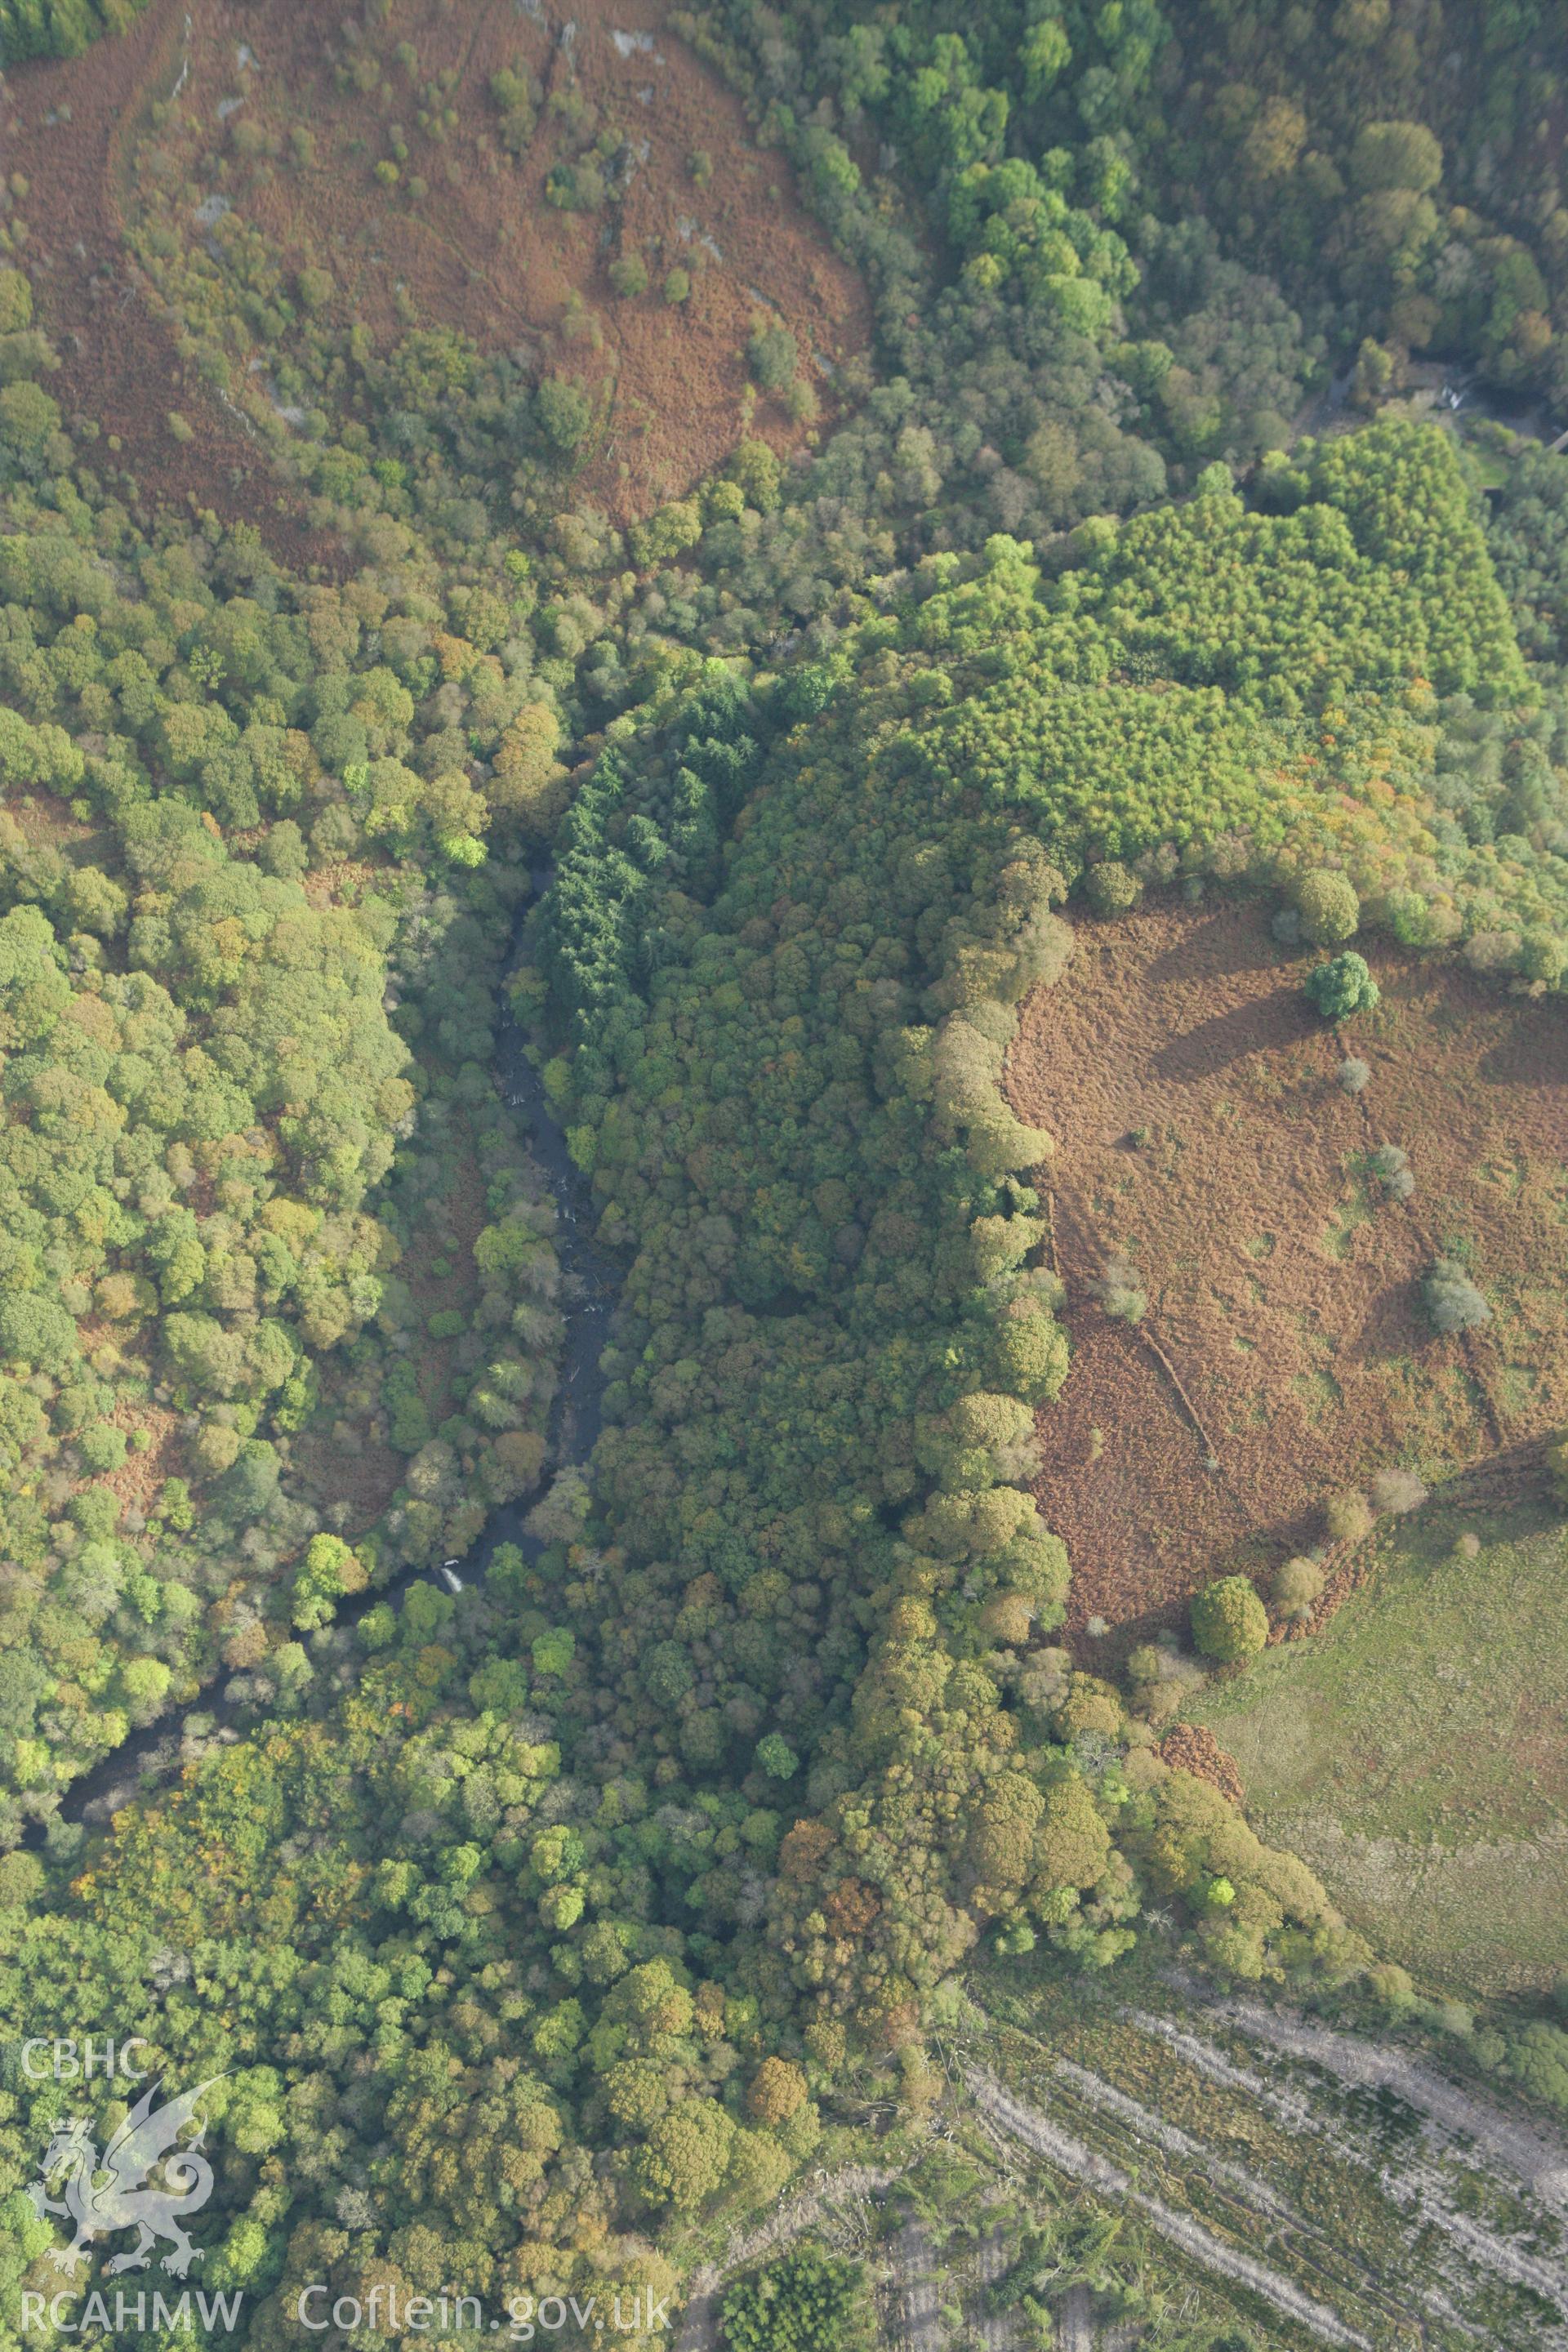 RCAHMW colour oblique aerial photograph of Glyn Neath Black Powder Works. Taken on 14 October 2009 by Toby Driver